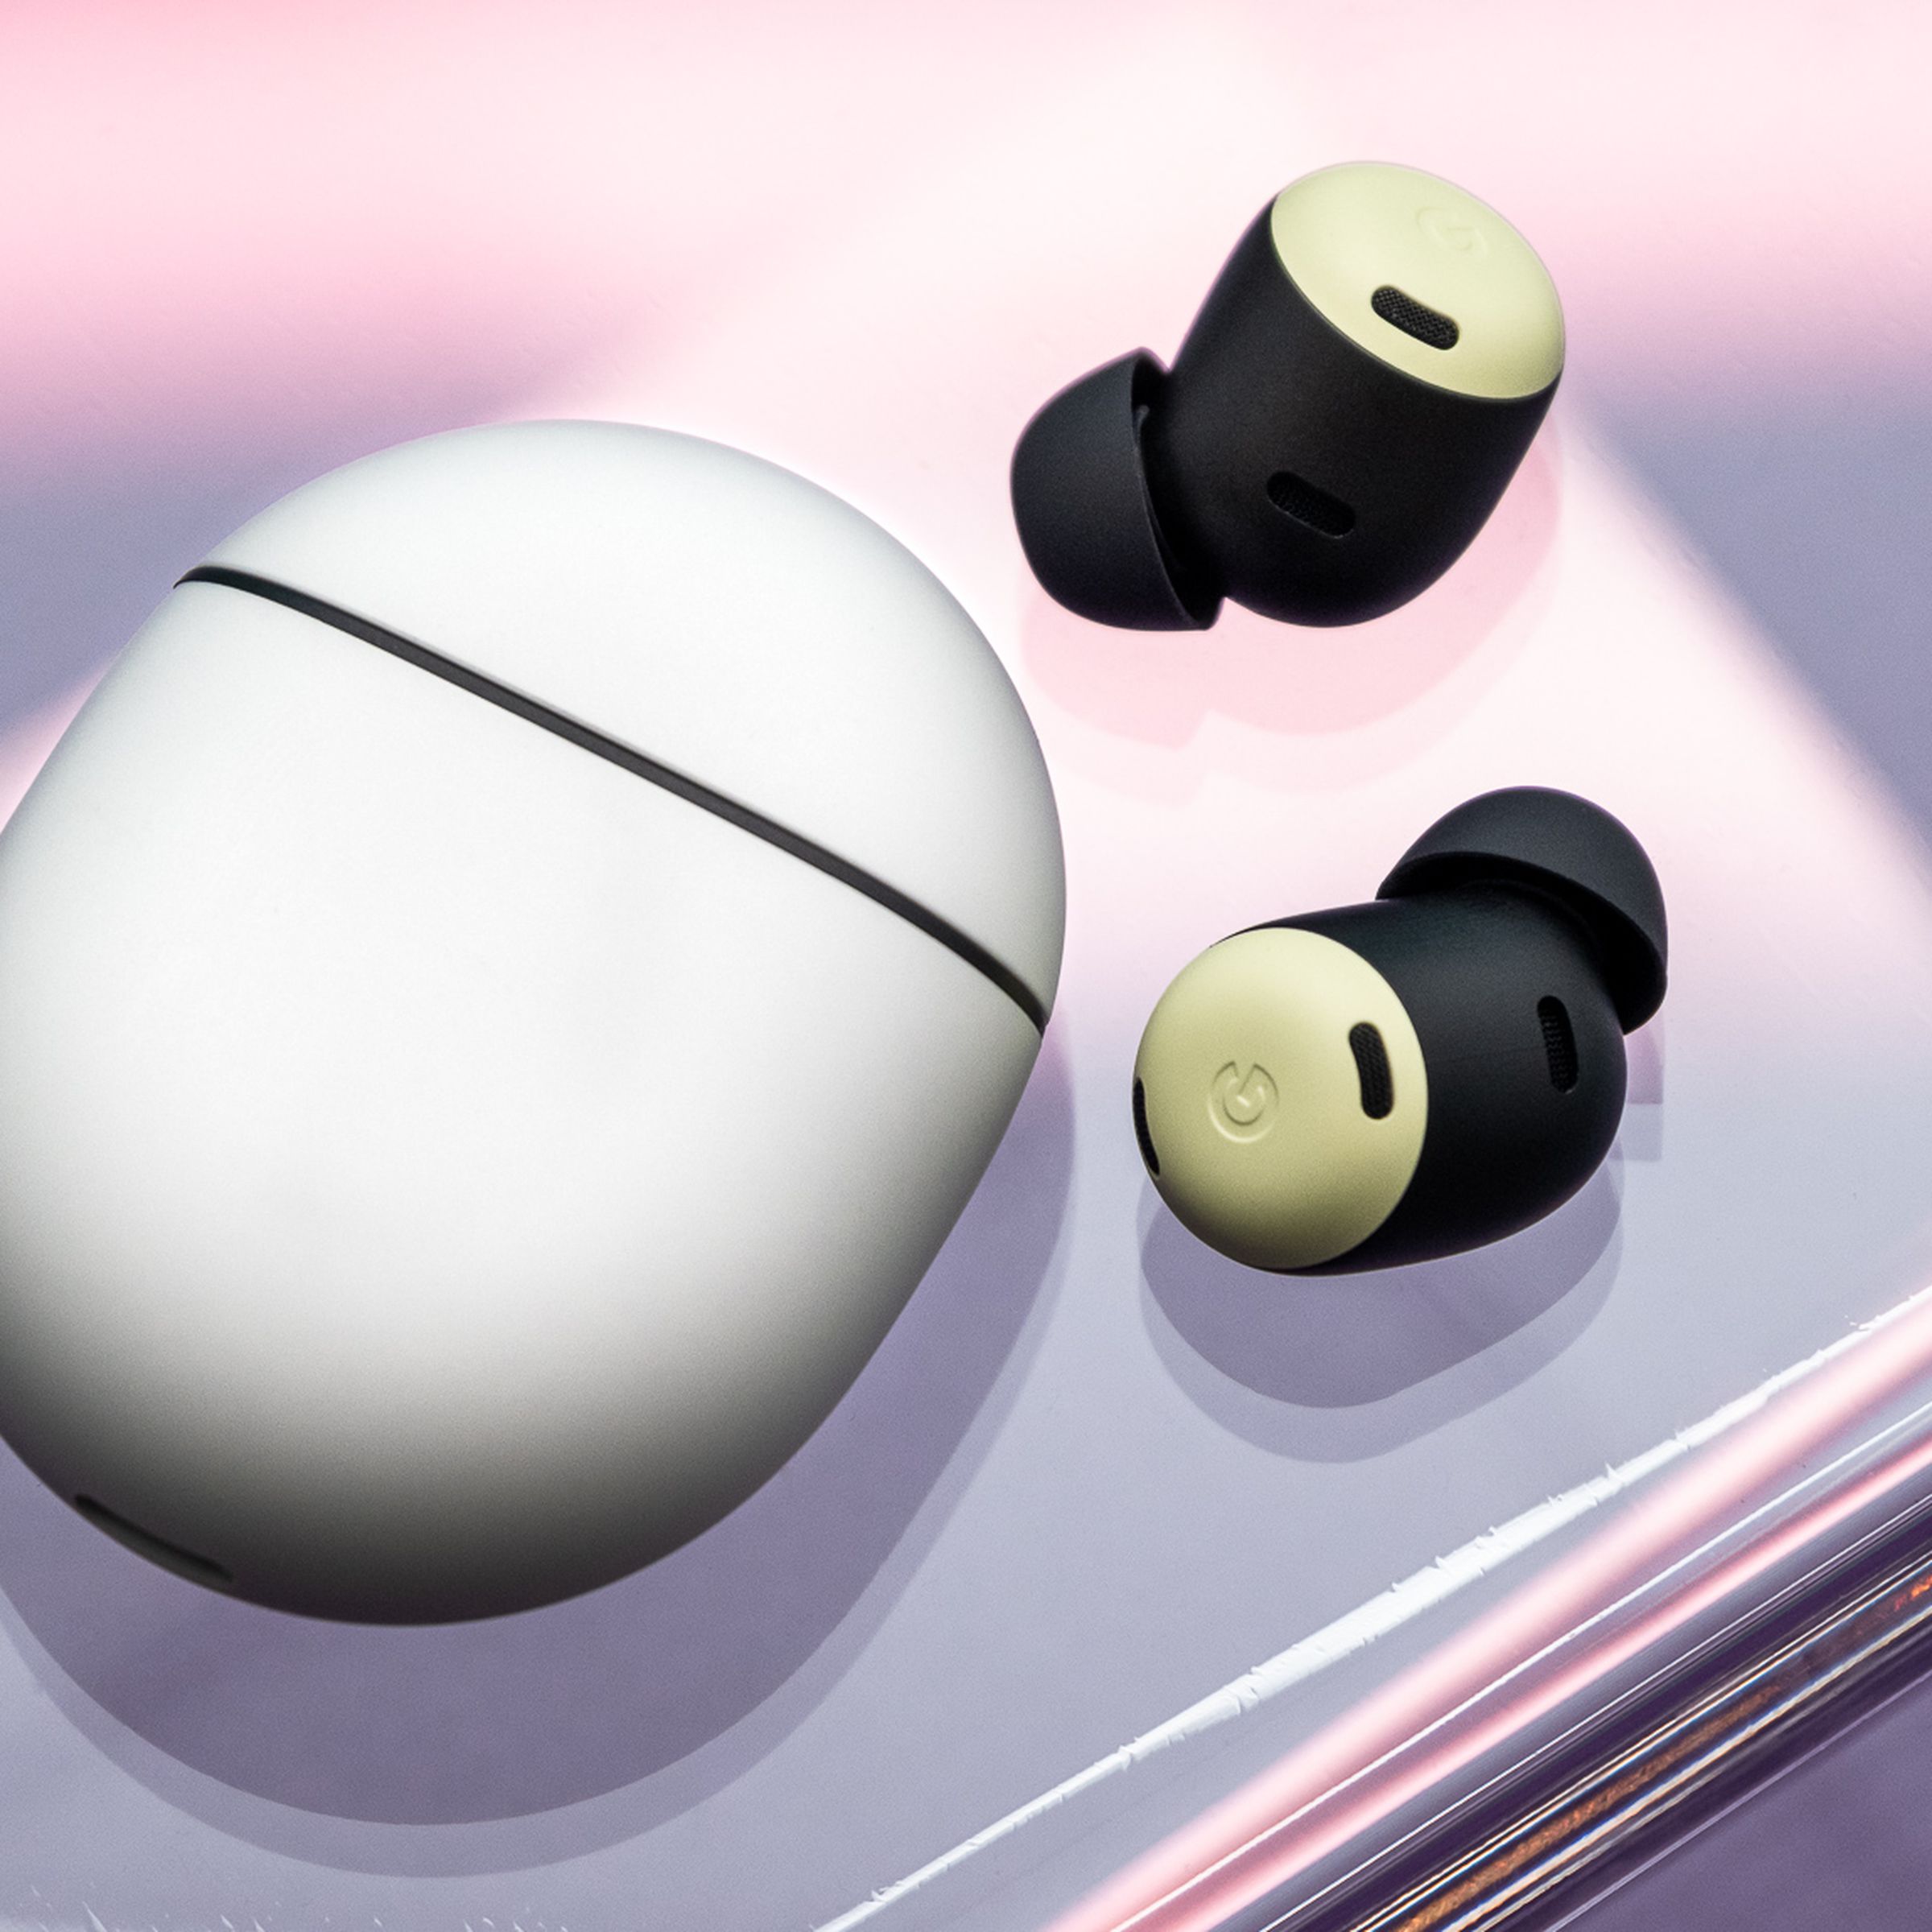 The Pixel Buds Pro go on sale July 28th for $199.